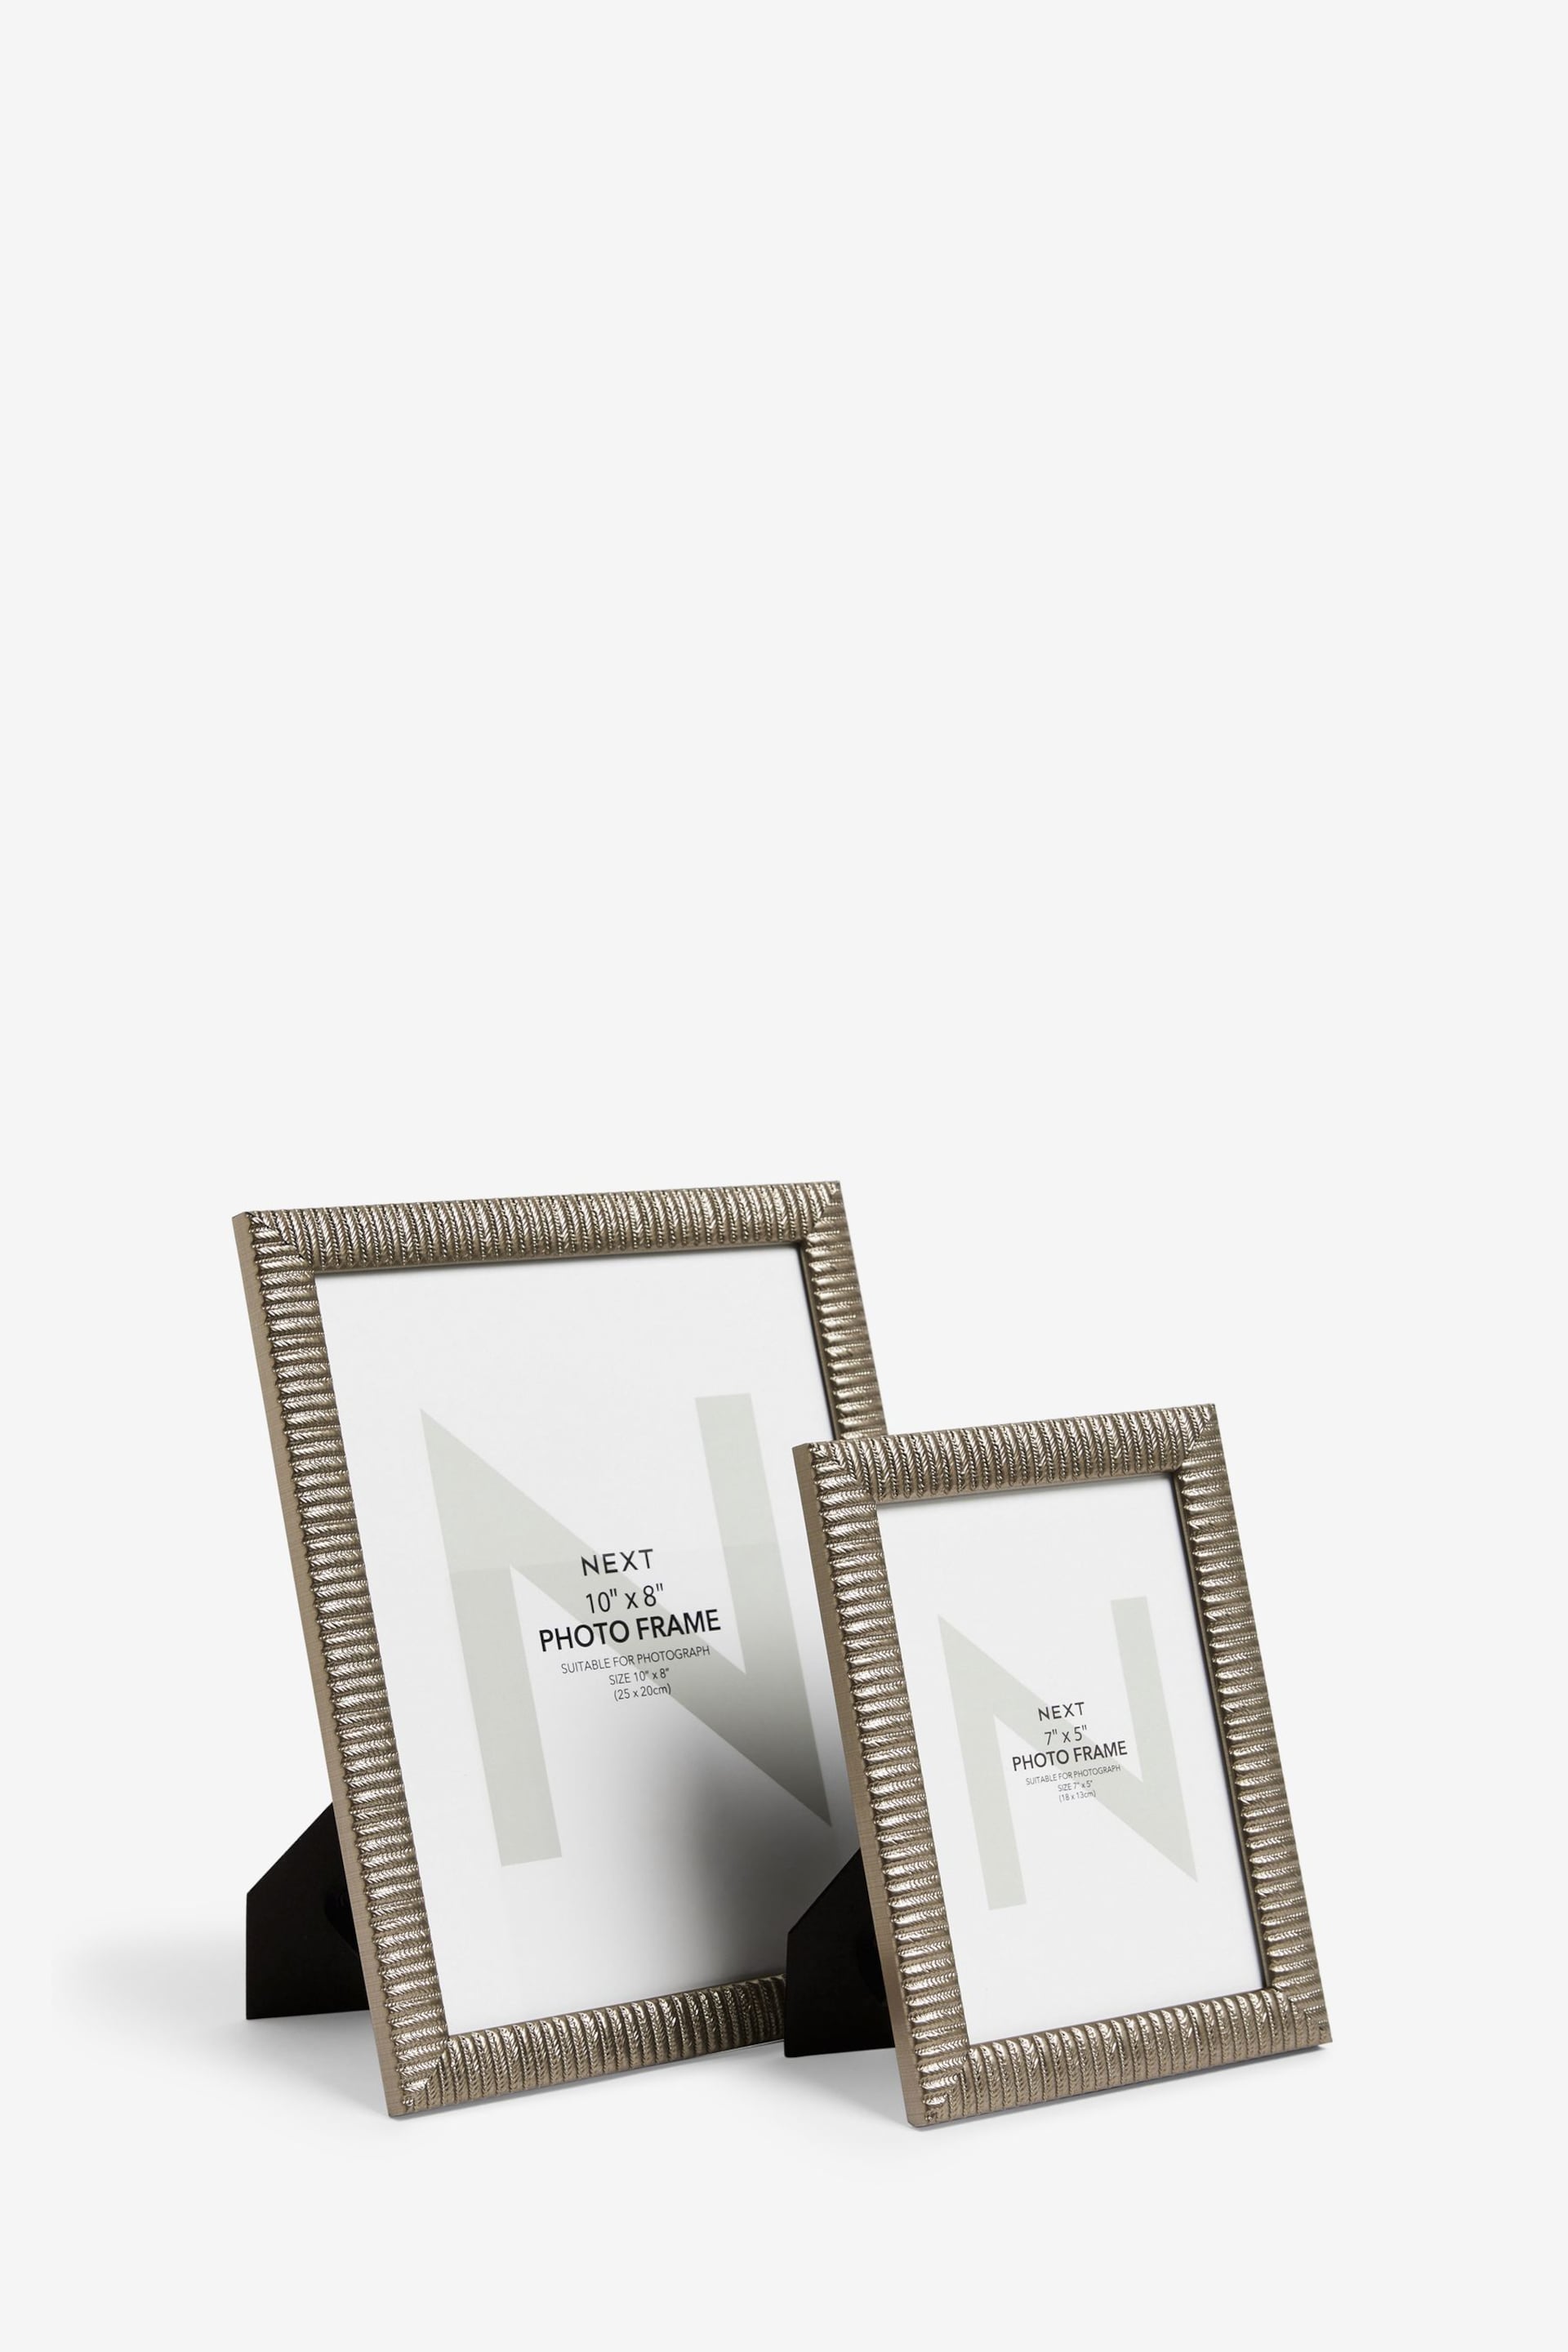 Set of 2 Silver Textured Photo Frames - Image 4 of 4